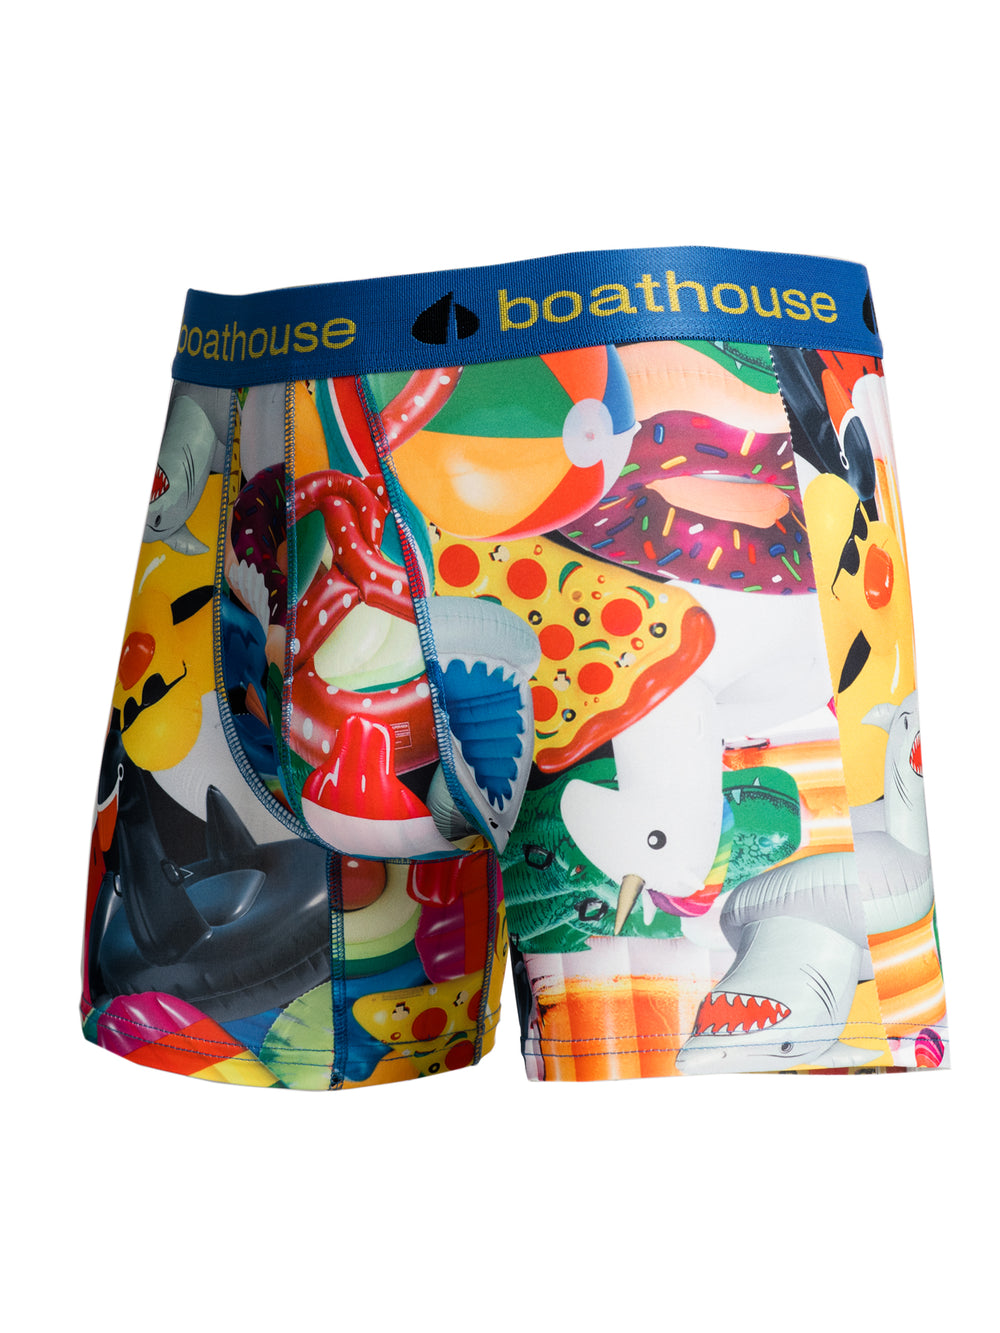 BOATHOUSE NOVELTY BOXER BRIEF - FLOATIES - CLEARANCE